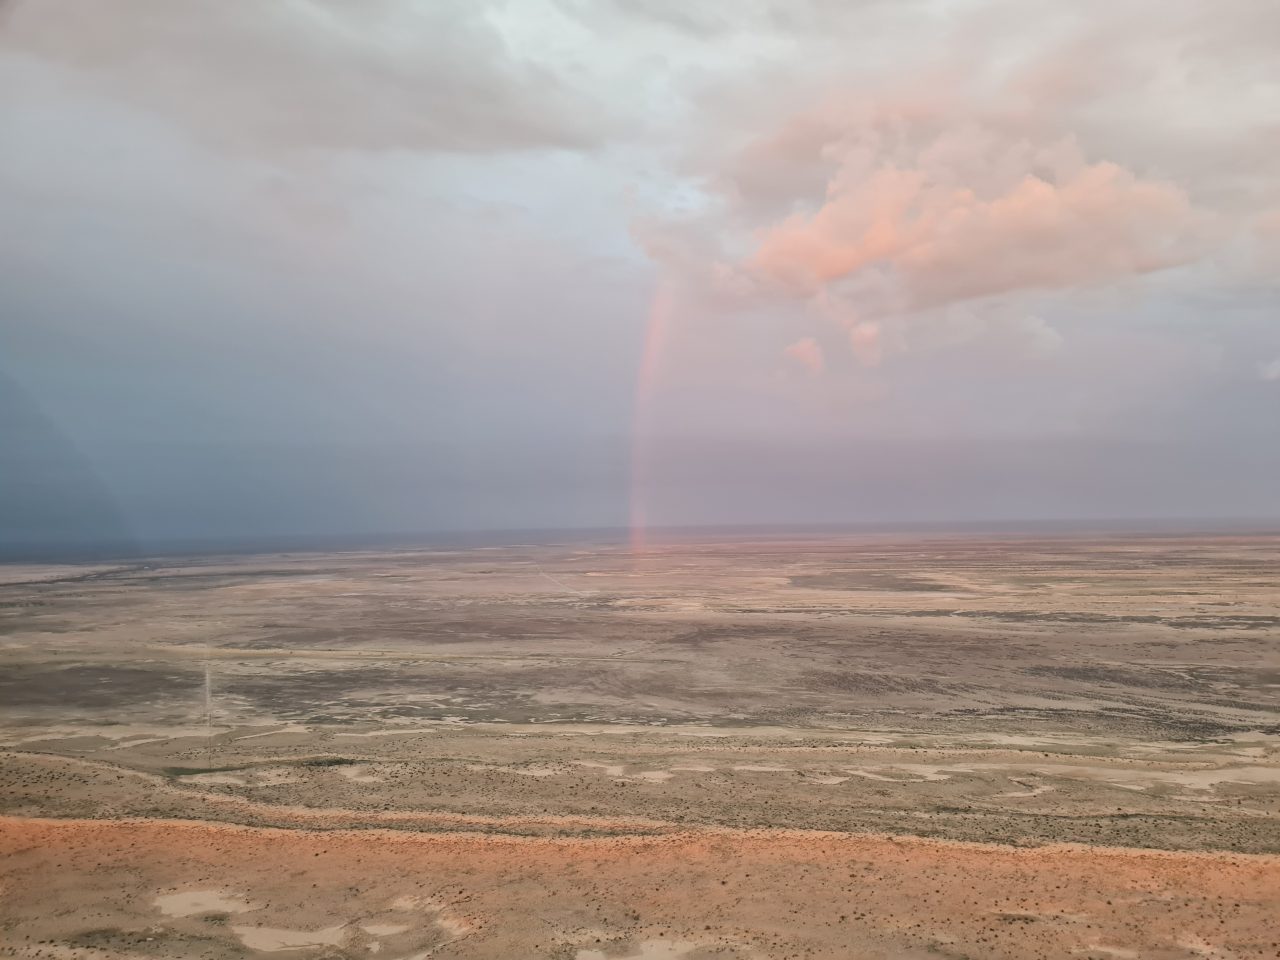 Aerial photo of landscape and sky. Landscape is expansive floodplain, sparsely vegetated and light yellow to orange coloured soils. Clouds are low, orange tinted and start of rainbow is visible.